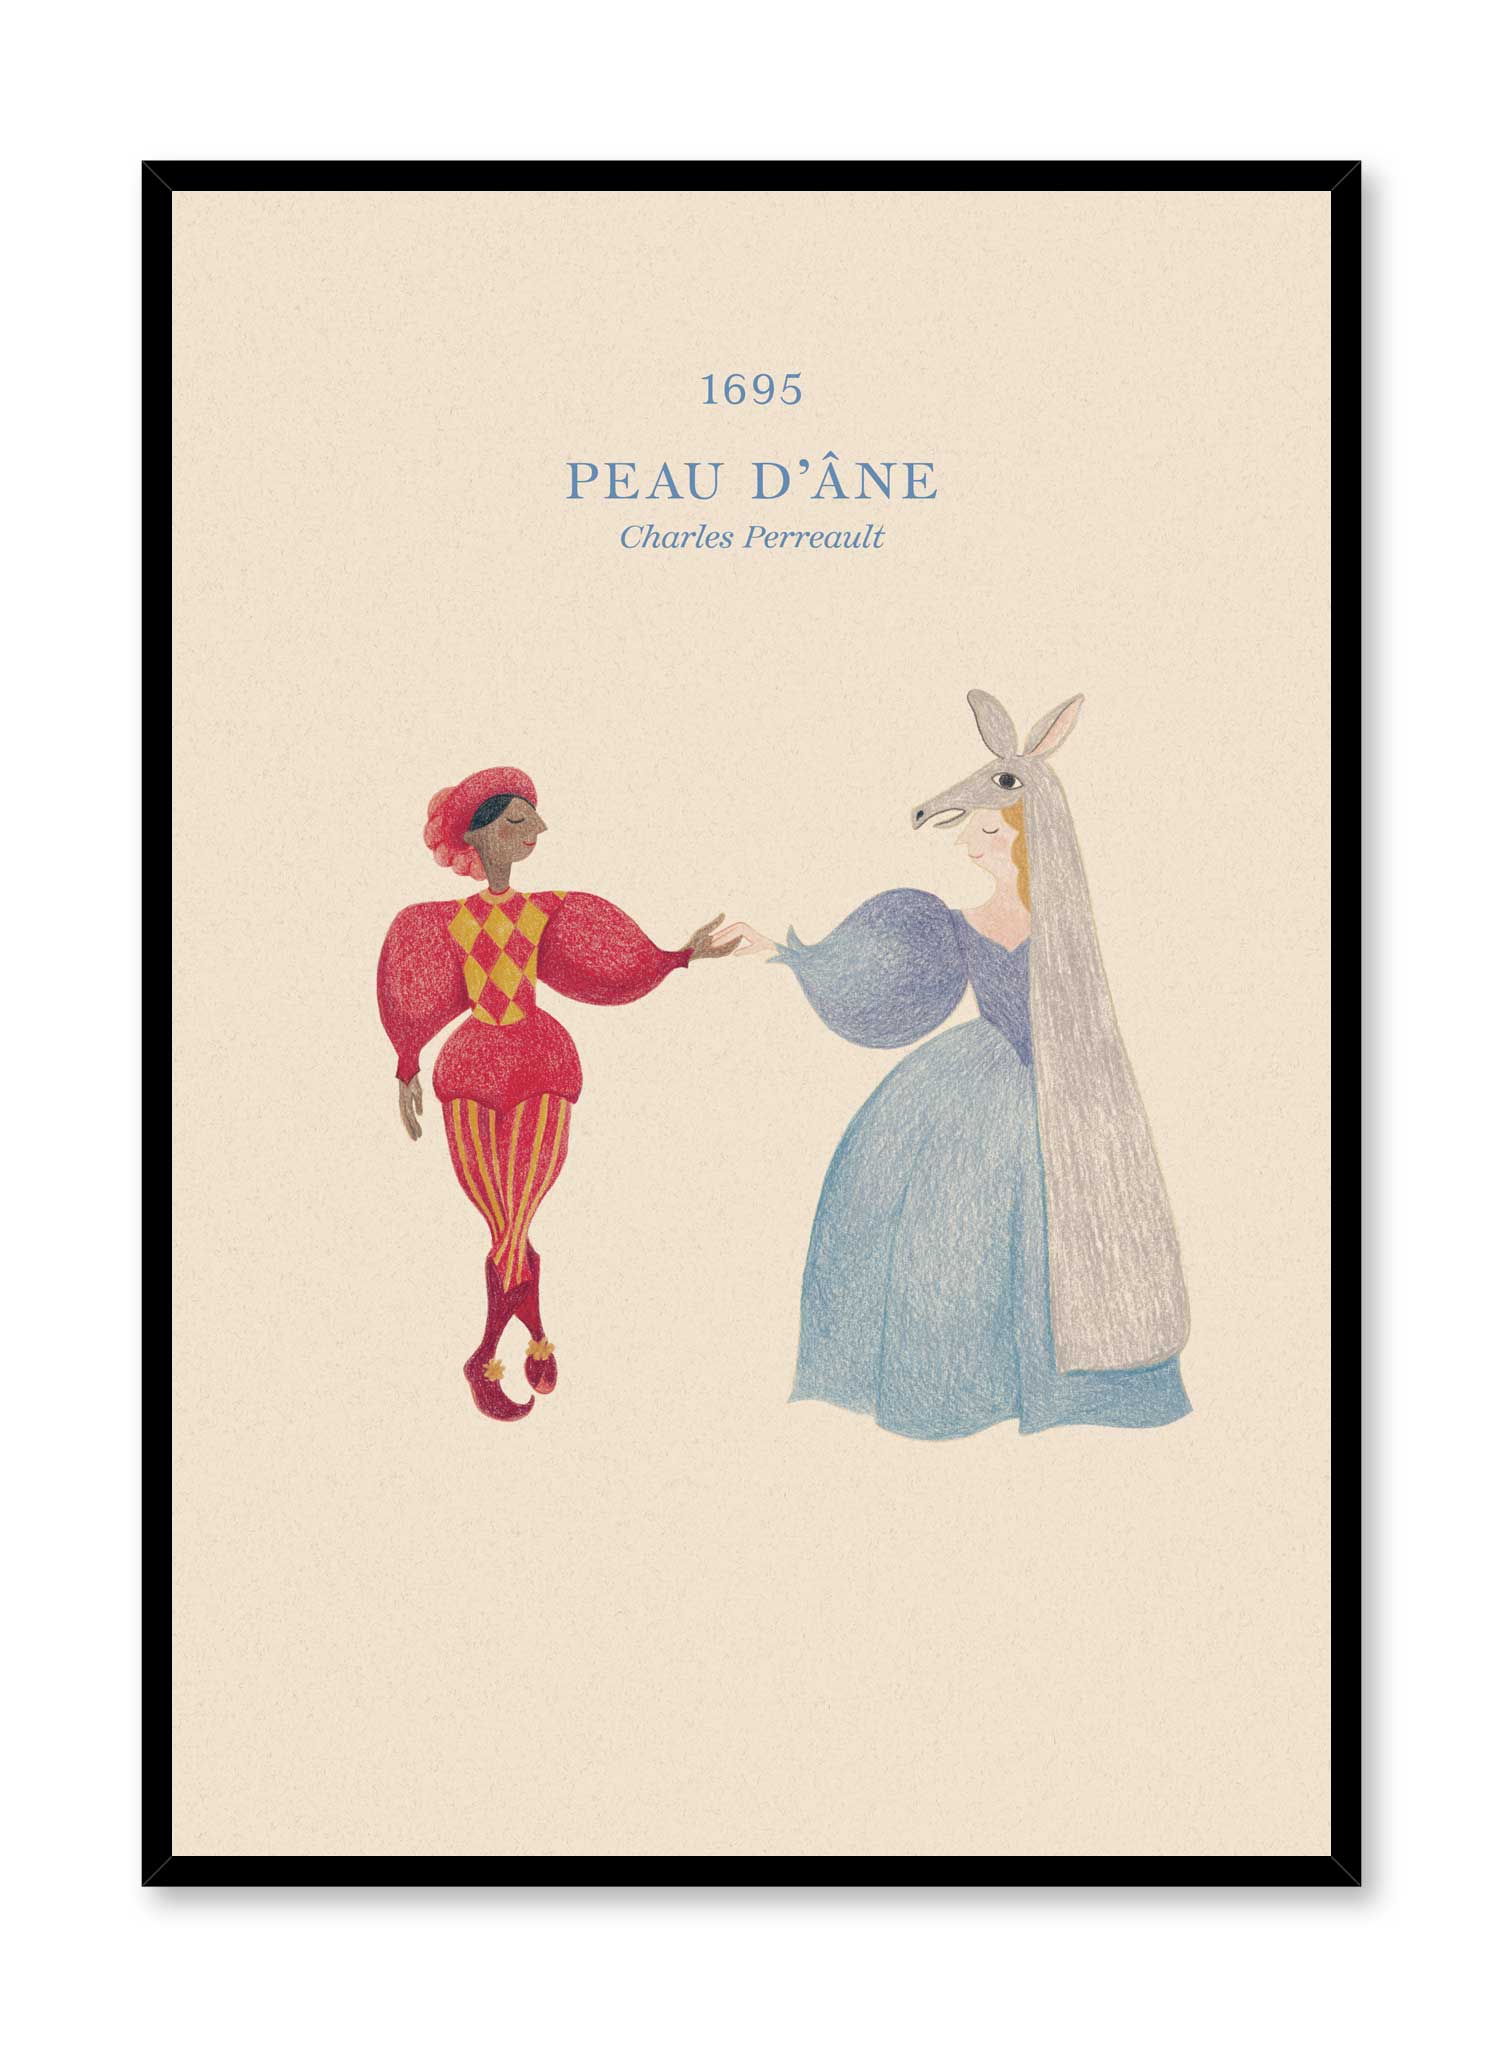 Donkey Skin is a minimalist illustration by Opposite Wall of Charles Perrault's Donkey Skin where the prince is tending his hand to the princess.